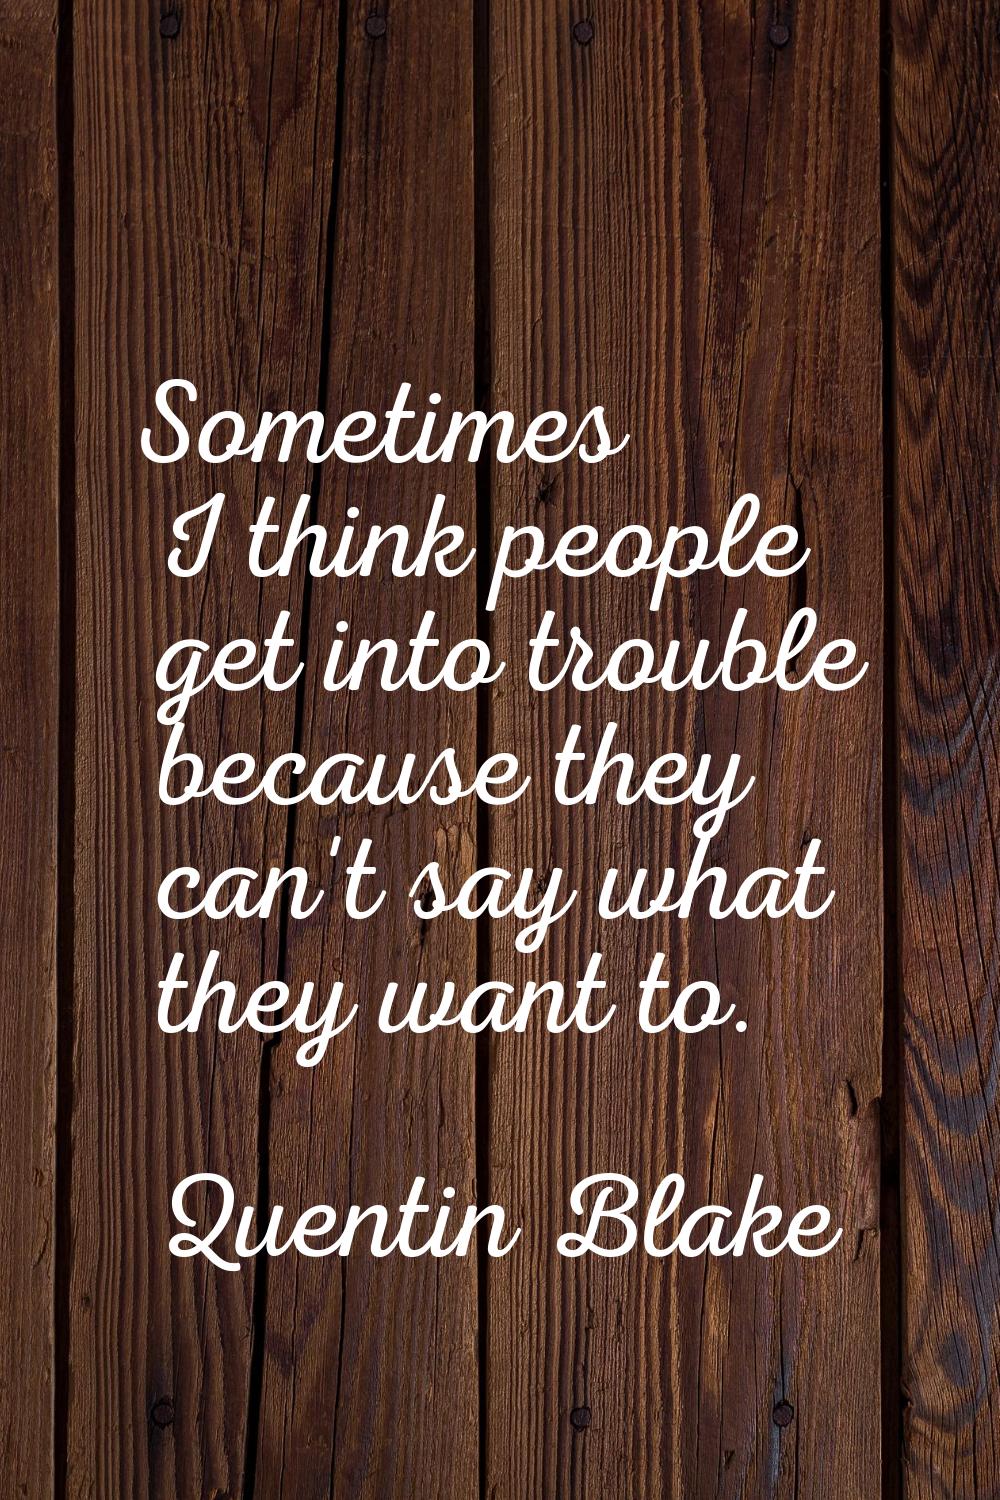 Sometimes I think people get into trouble because they can't say what they want to.